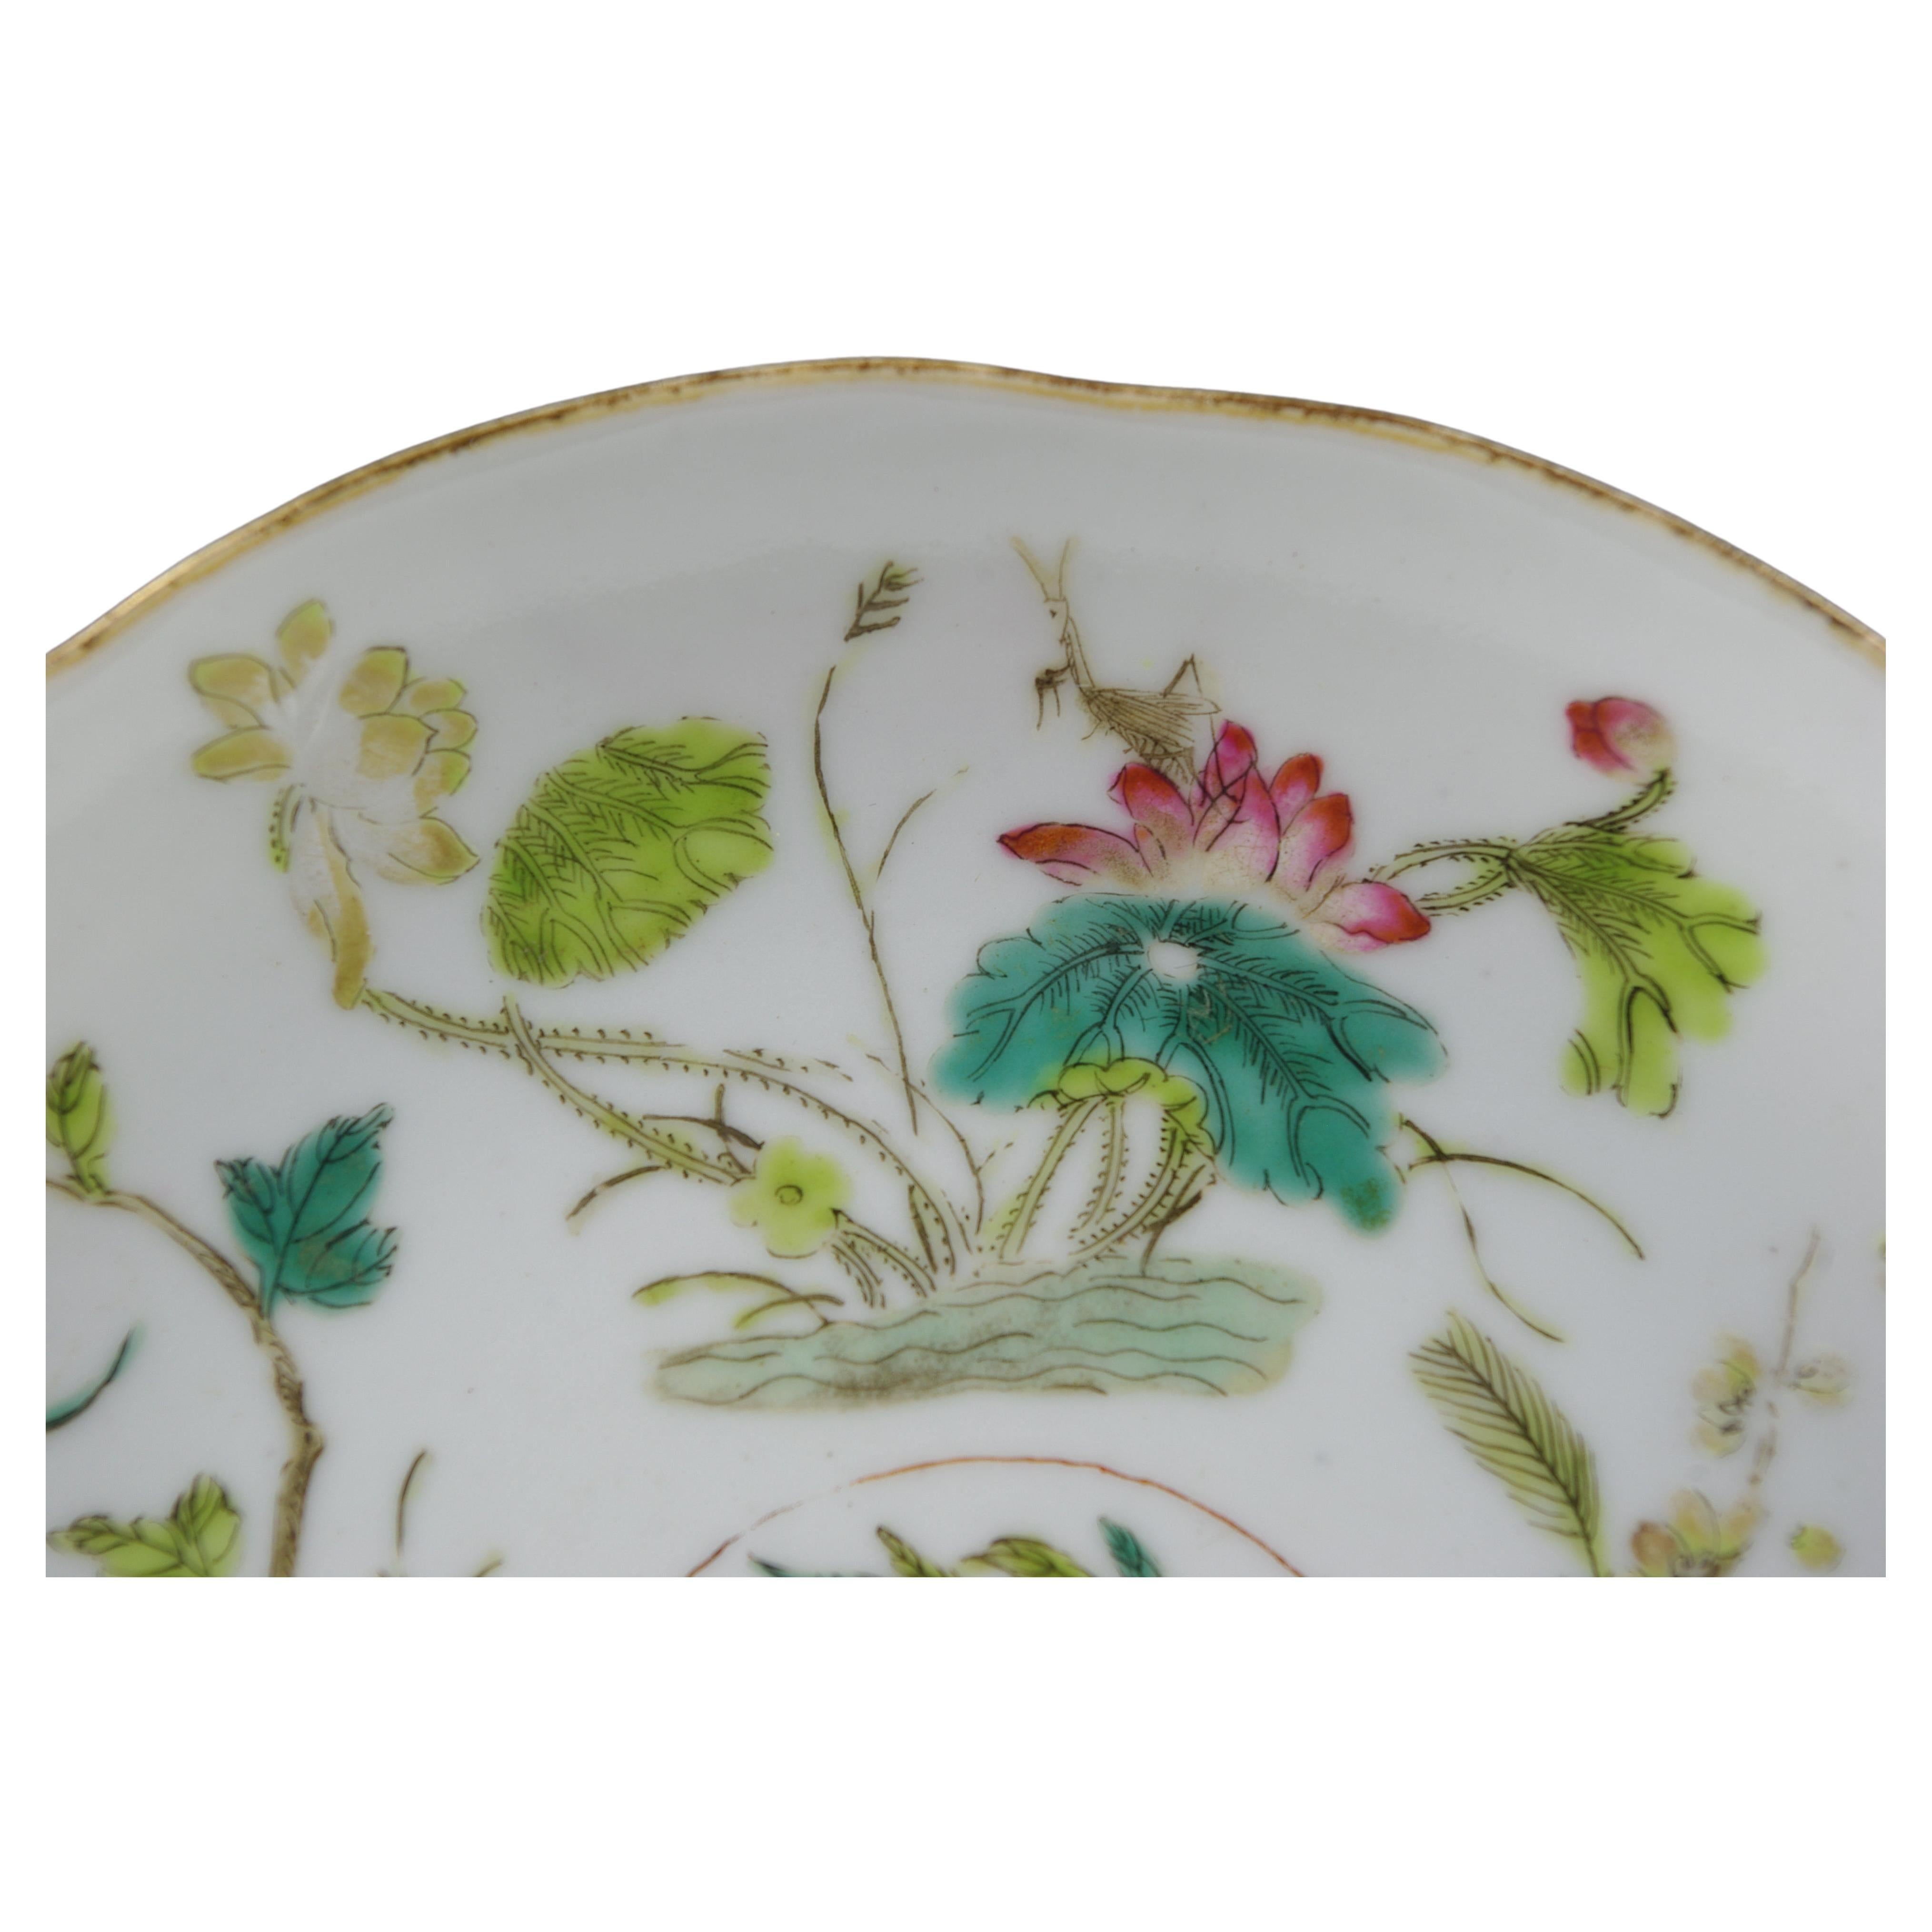 19th Century Antique Chinese Porcelain Famille Rose Fencai Saucer Dish 5 Flowers Daoguang 19c For Sale